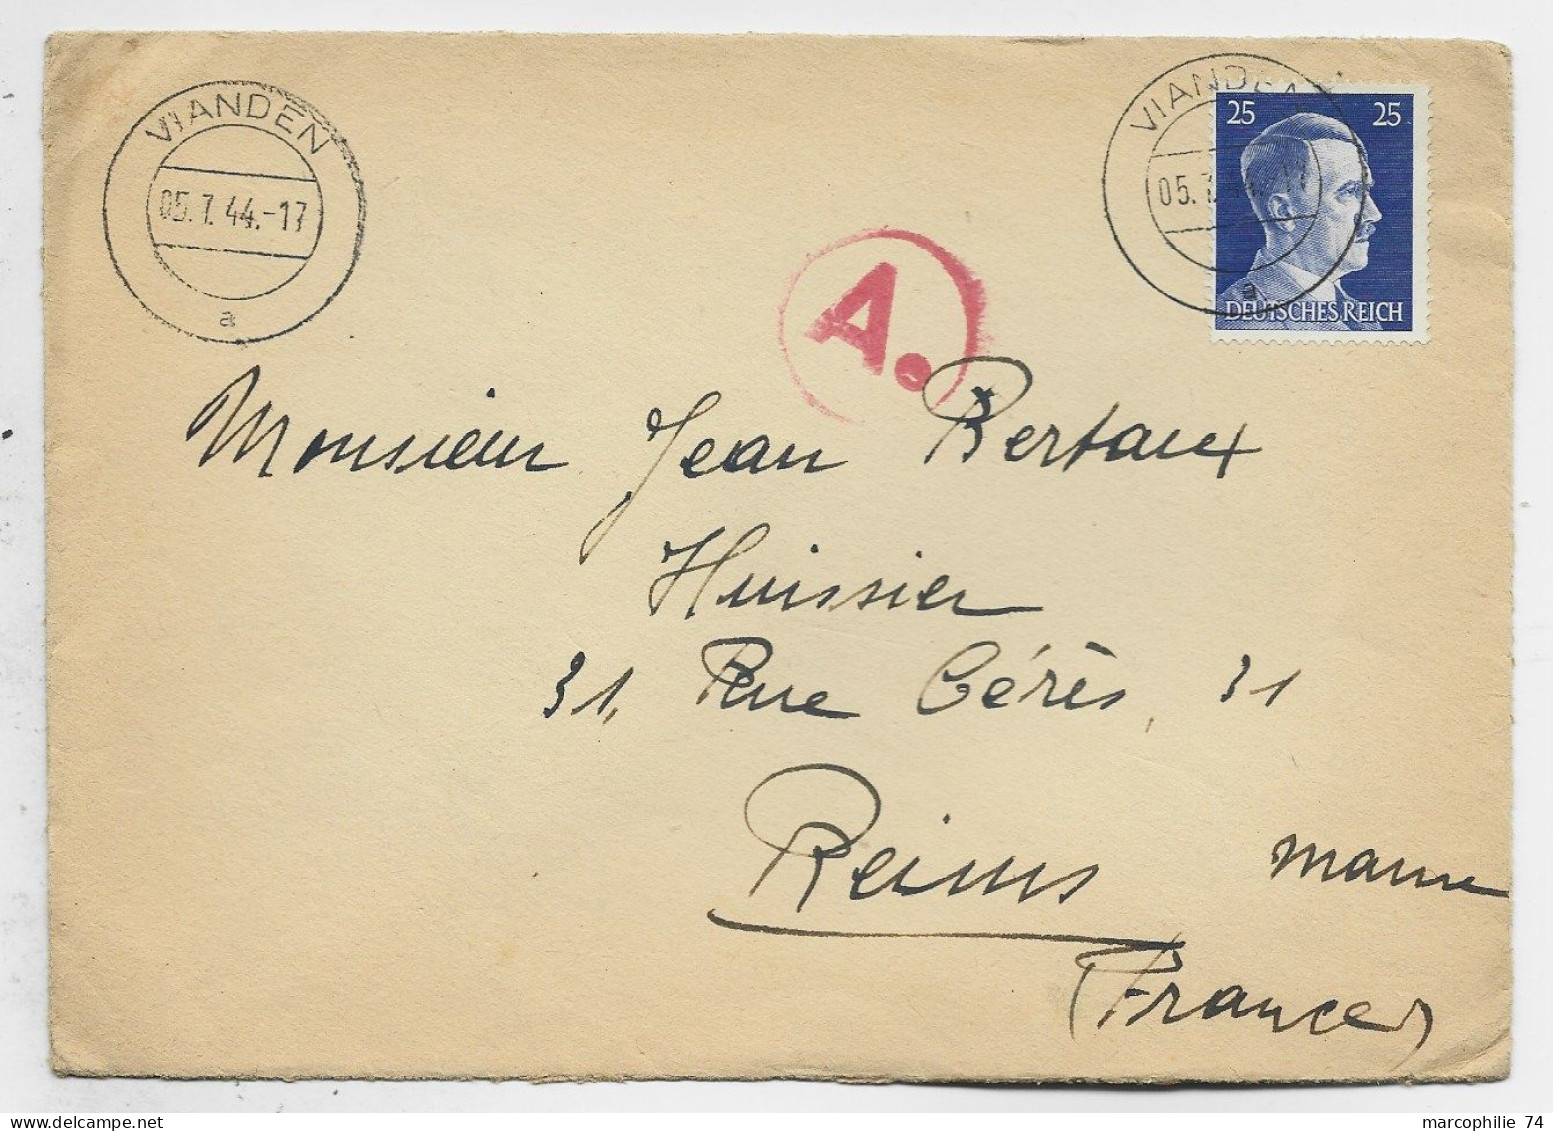 GERMANY 25C HITLER SEUL LETTRE BRIEF COVER VIANDEN 05.1.1944  LUXEMBOURG POUR REIMS MARNE + CENSURE AE - 1940-1944 Occupation Allemande